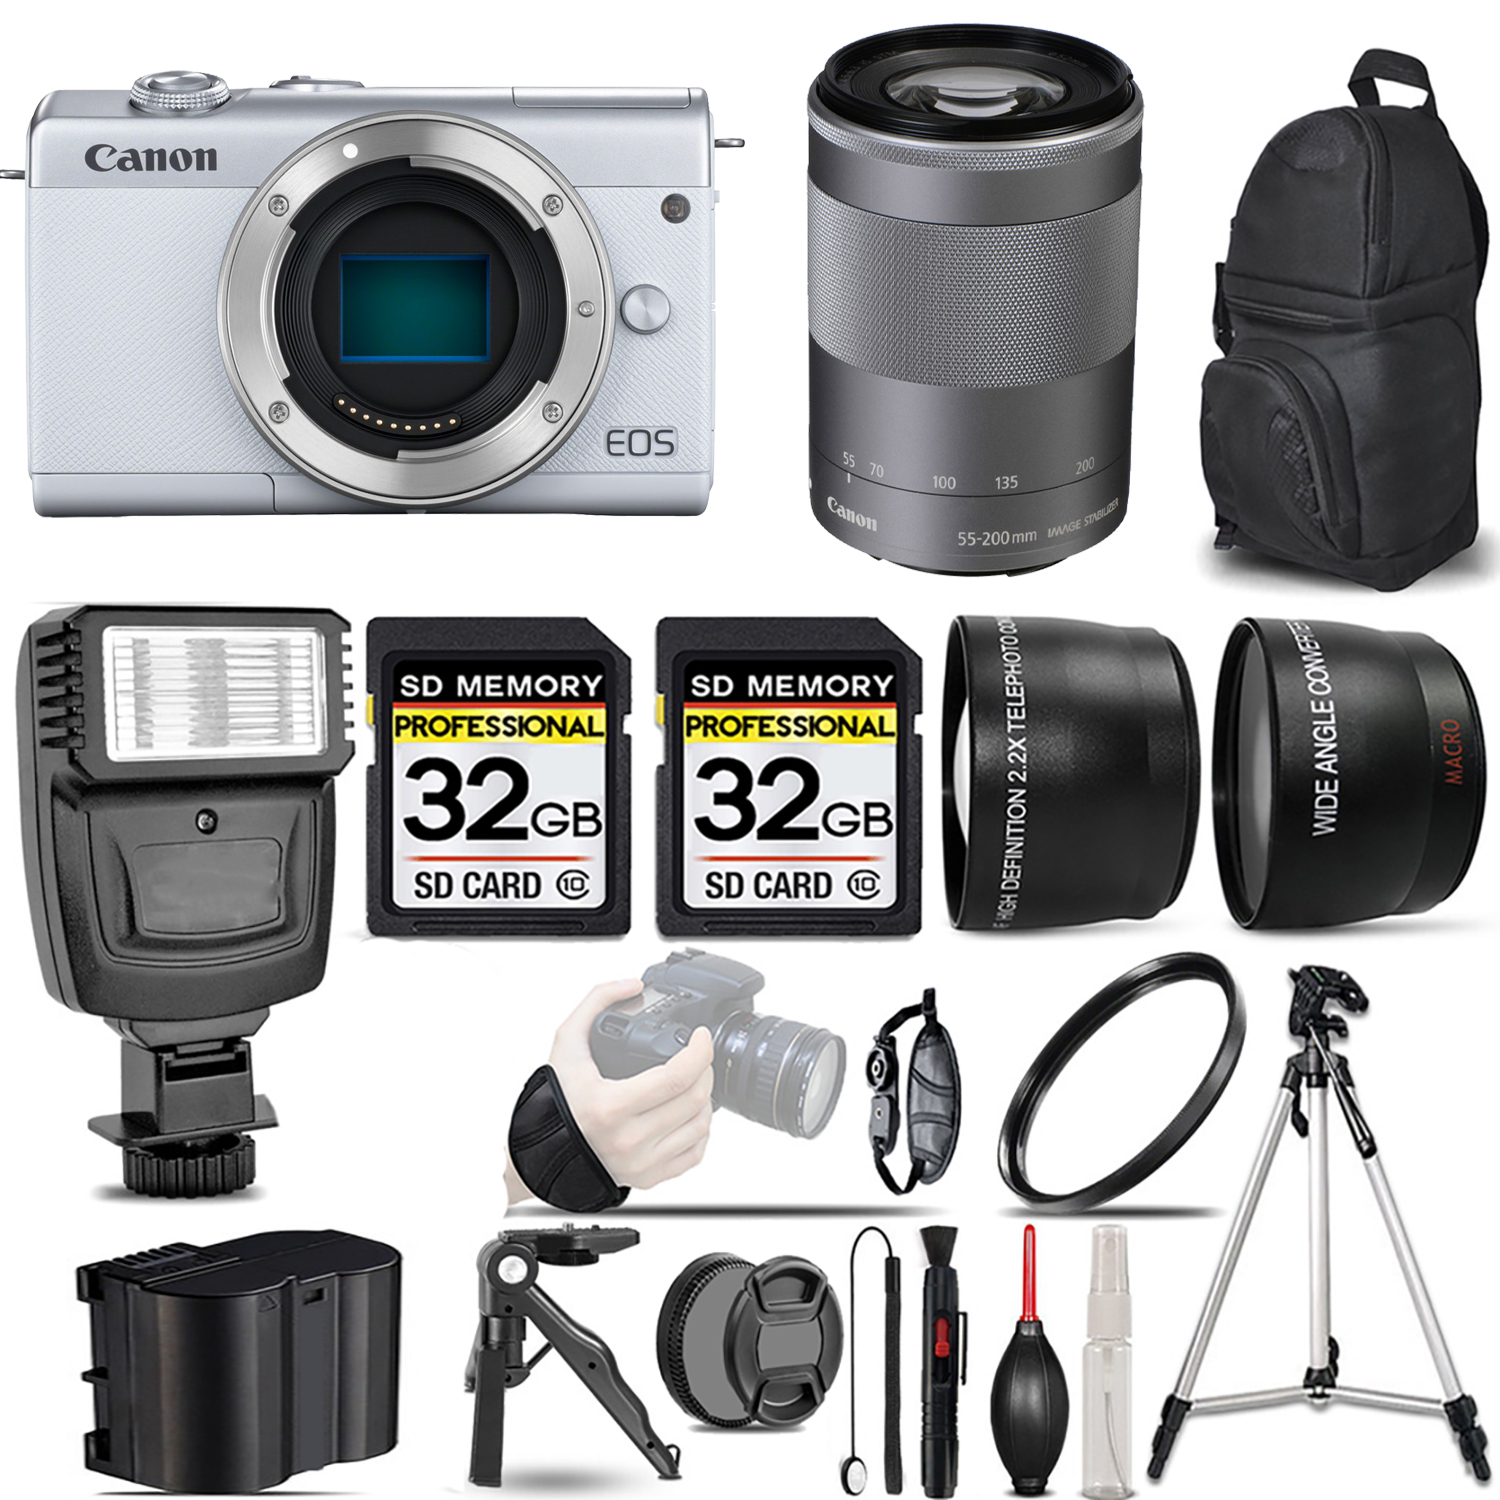 EOS M200  Camera (White) + 55-200mm IS STM Lens (Silver) + Flash + 64GB - Kit *FREE SHIPPING*